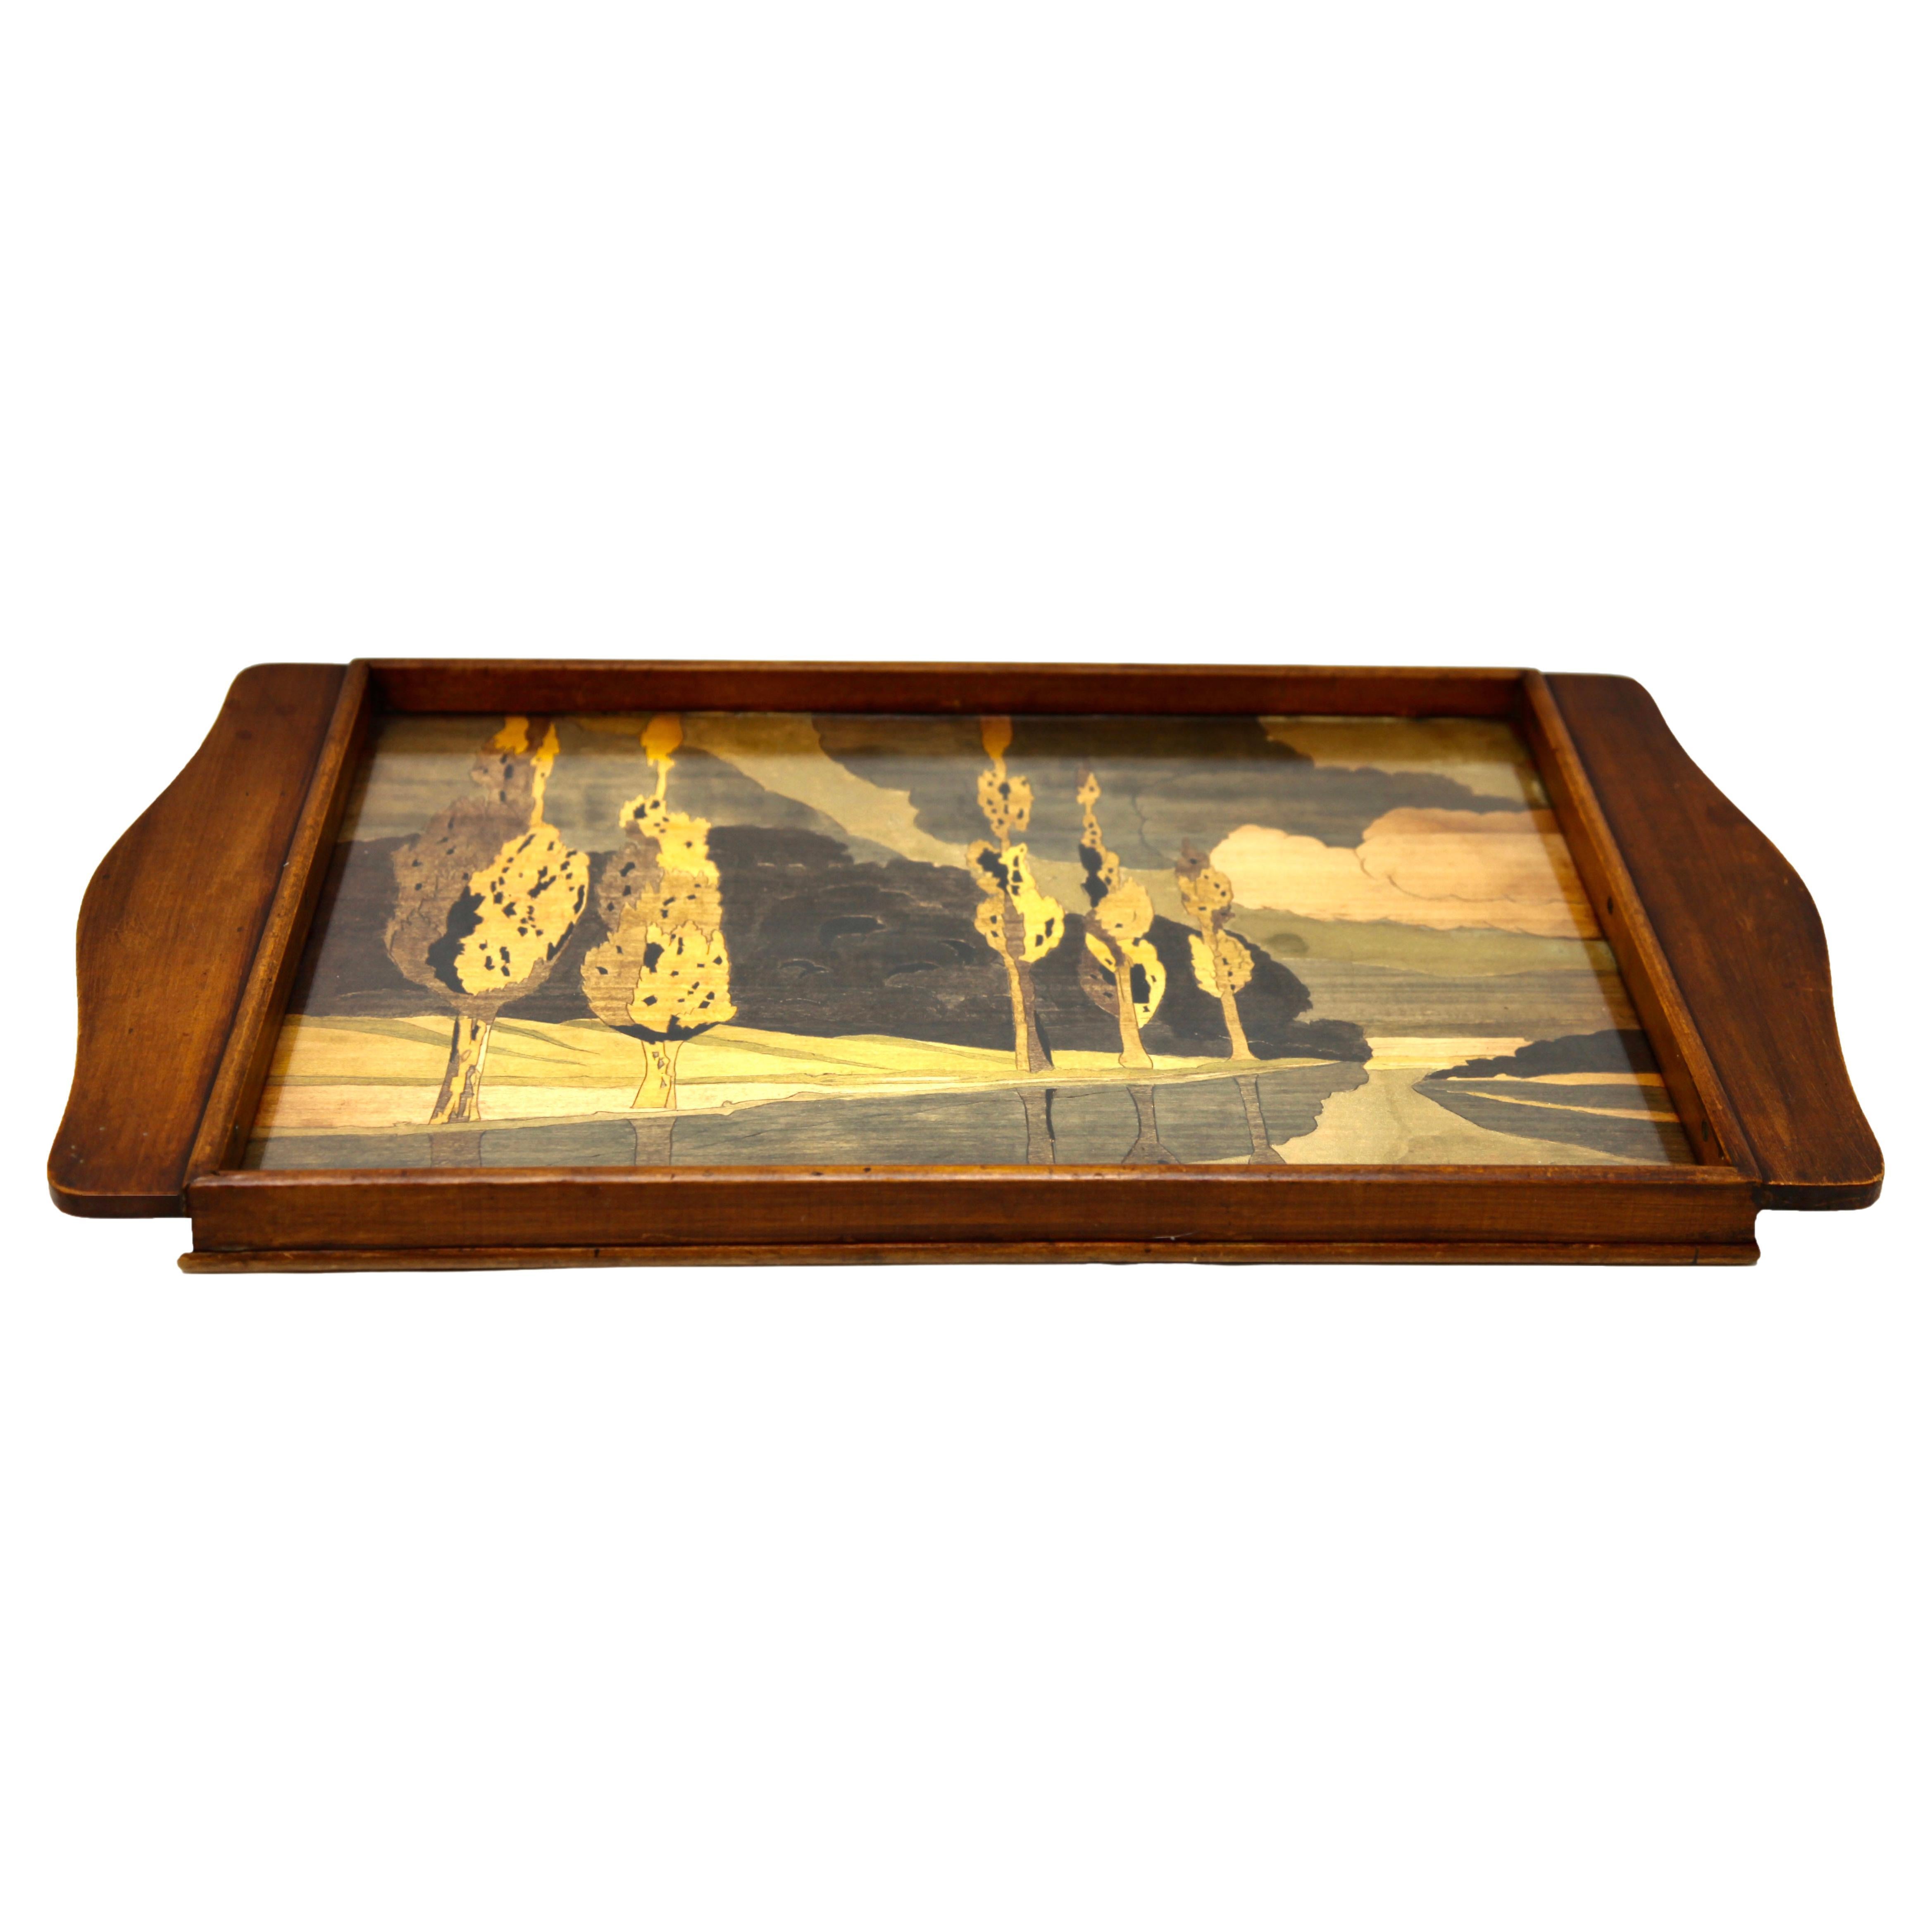 Art Nouveau Tray with Wood Panel Covert with Glass and Landscape Decoration For Sale